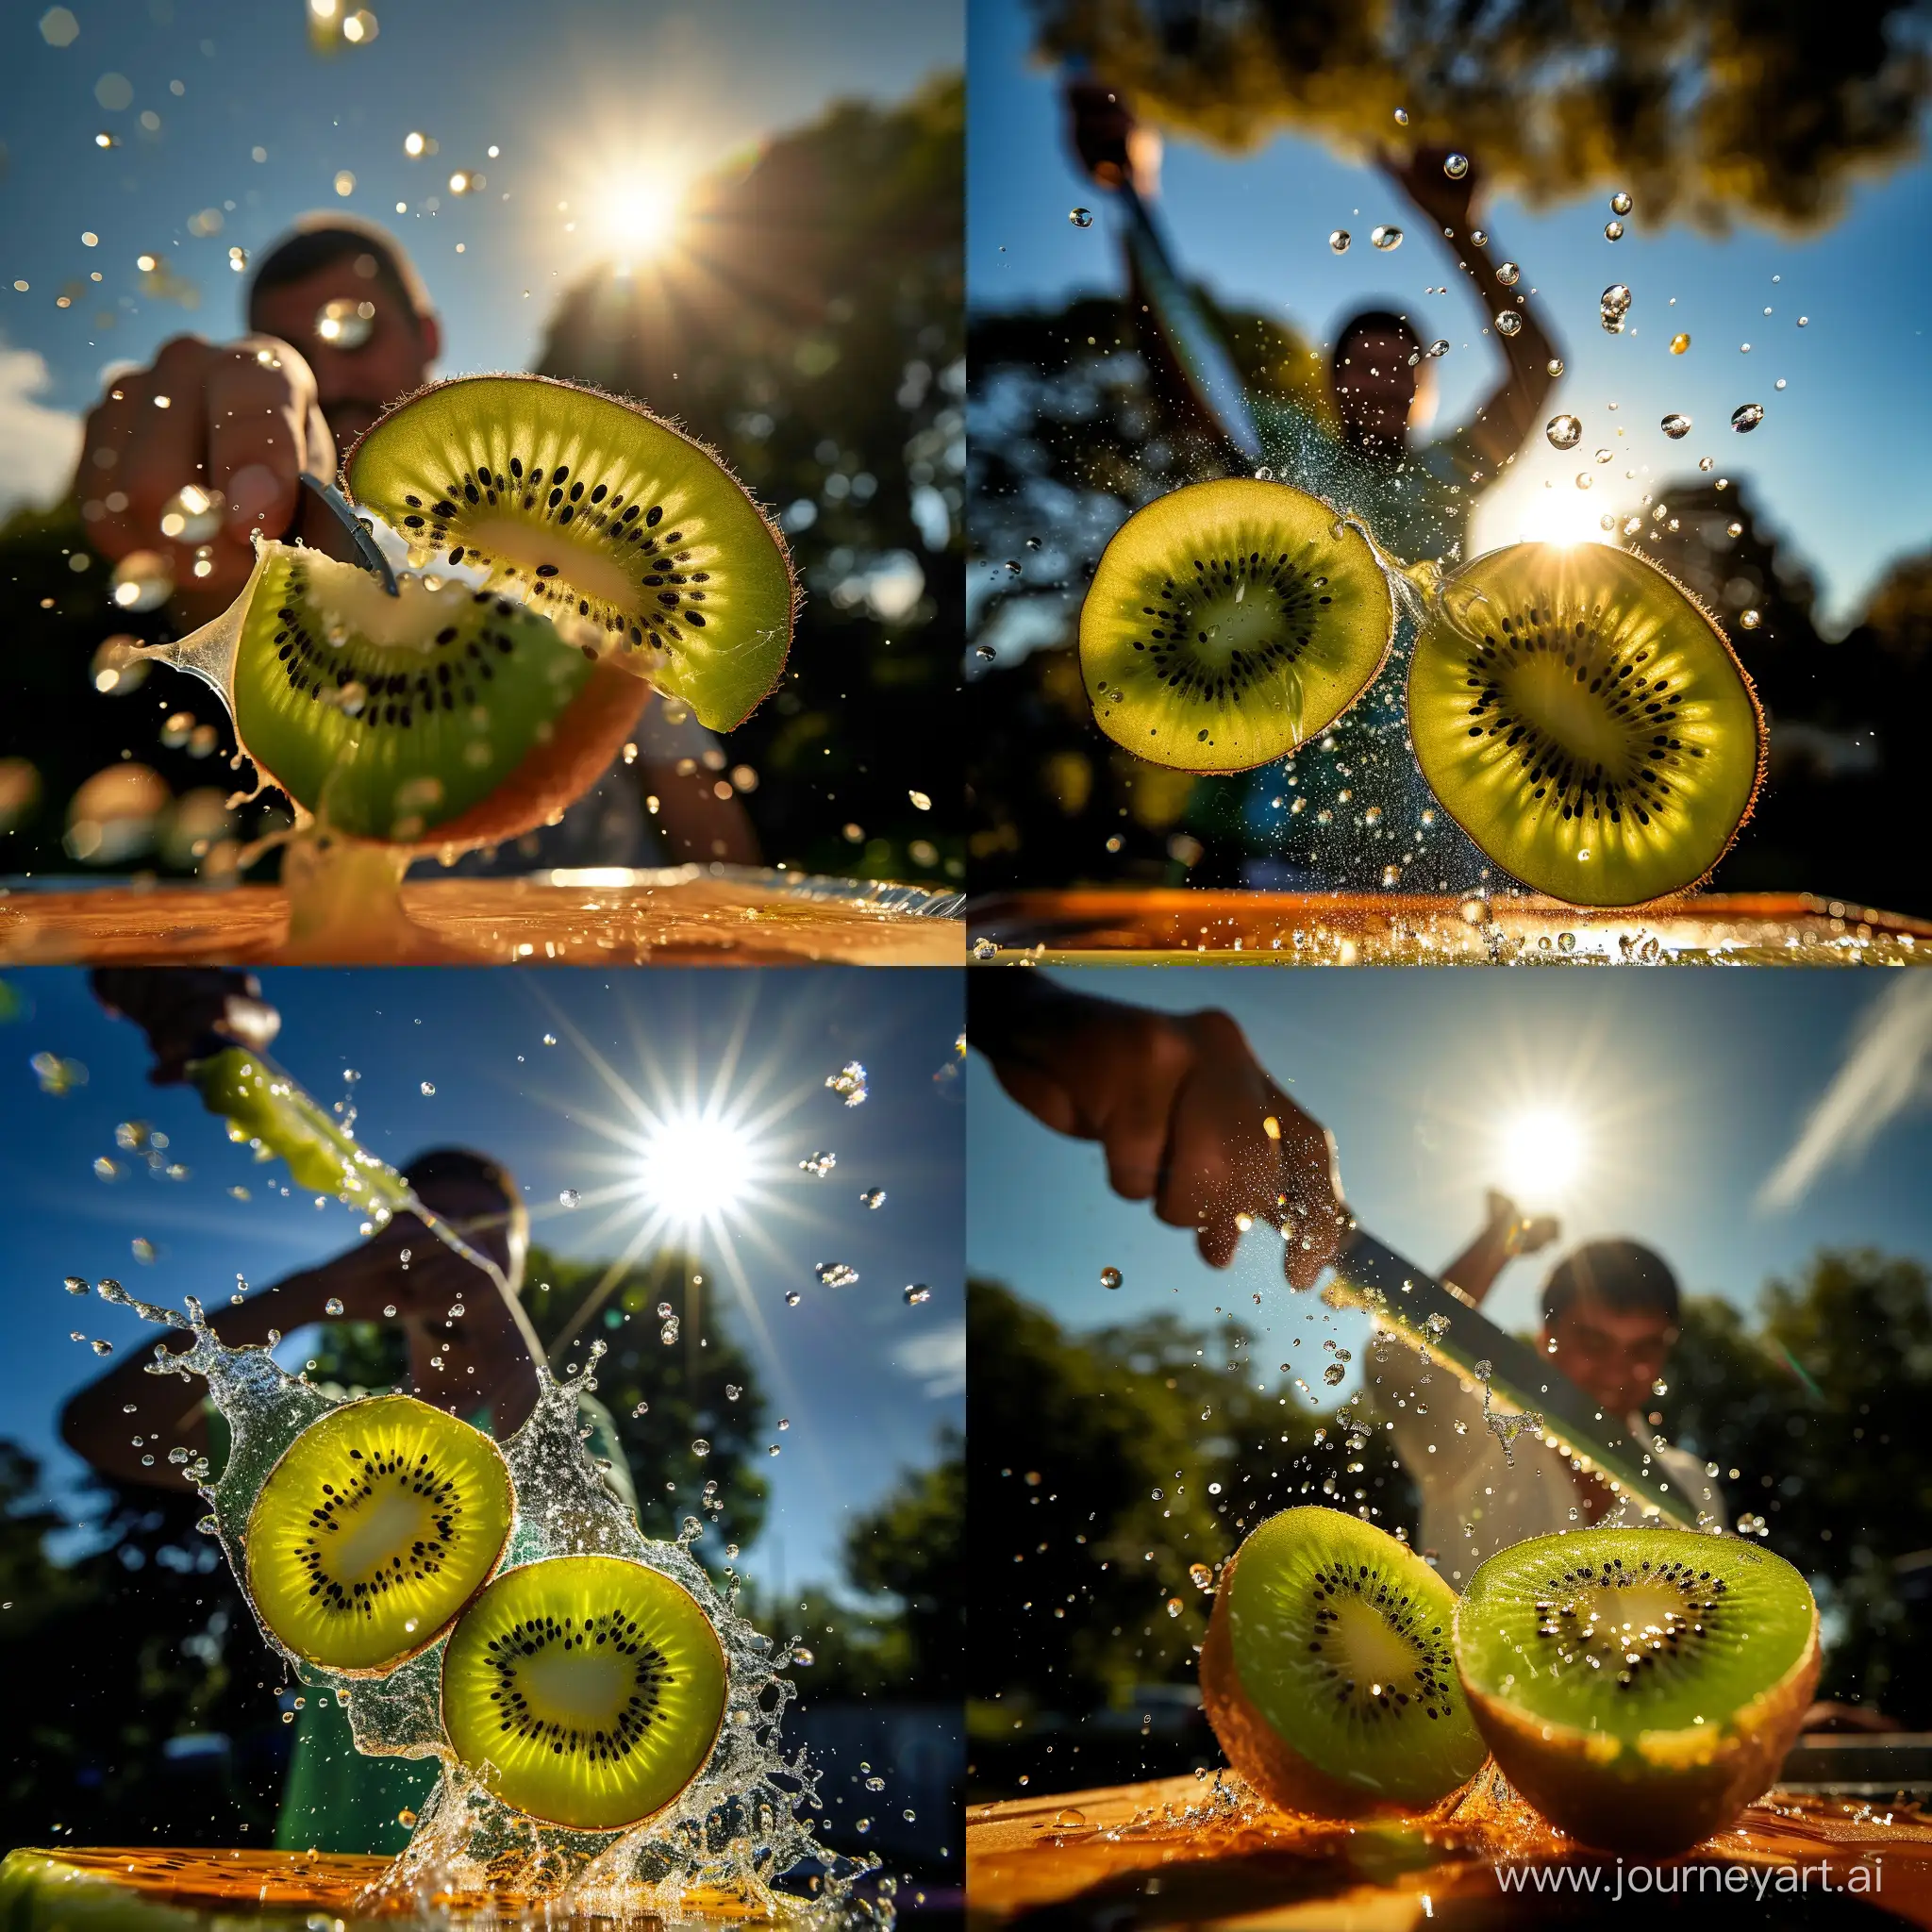  a dynamic and creative photograph featuring a person in the background, blurred and out of focus, holding a knife and slicing a kiwi fruit in mid-air. The kiwi is captured in the foreground with great detail and sharpness, split into two halves, with one half closer to the camera than the other. Droplets of juice and kiwi seeds are visible in the air, creating a sense of movement and action. The sun is visible in the background, providing a warm backlight that highlights the edges of the kiwi and the droplets, enhancing the overall visual impact of the image. The background also includes trees and a blue sky, suggesting that the photo was taken outdoors, possibly during the late afternoon given the warm sunlight. -- 9:16